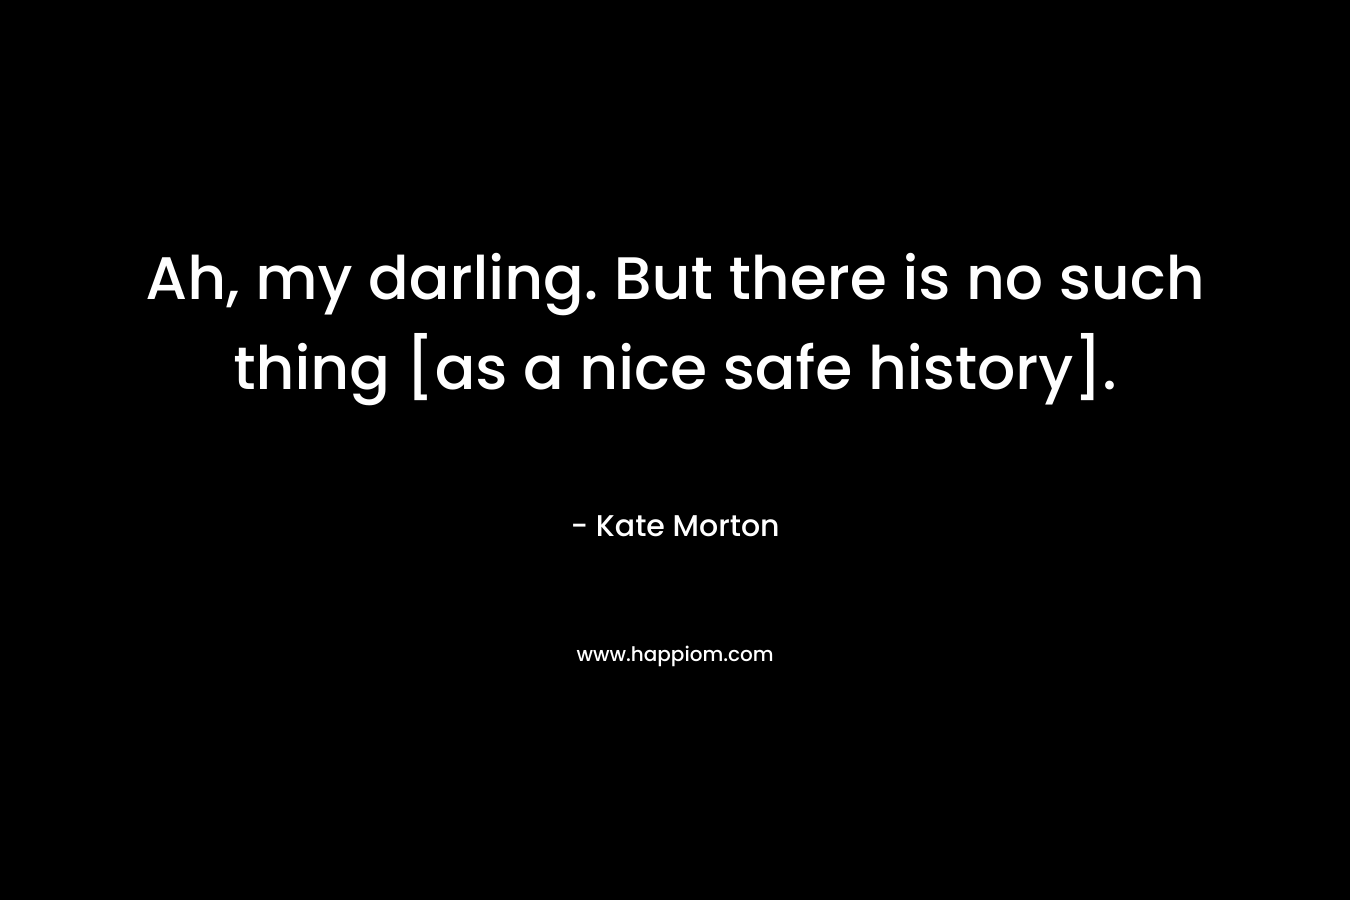 Ah, my darling. But there is no such thing [as a nice safe history]. – Kate Morton